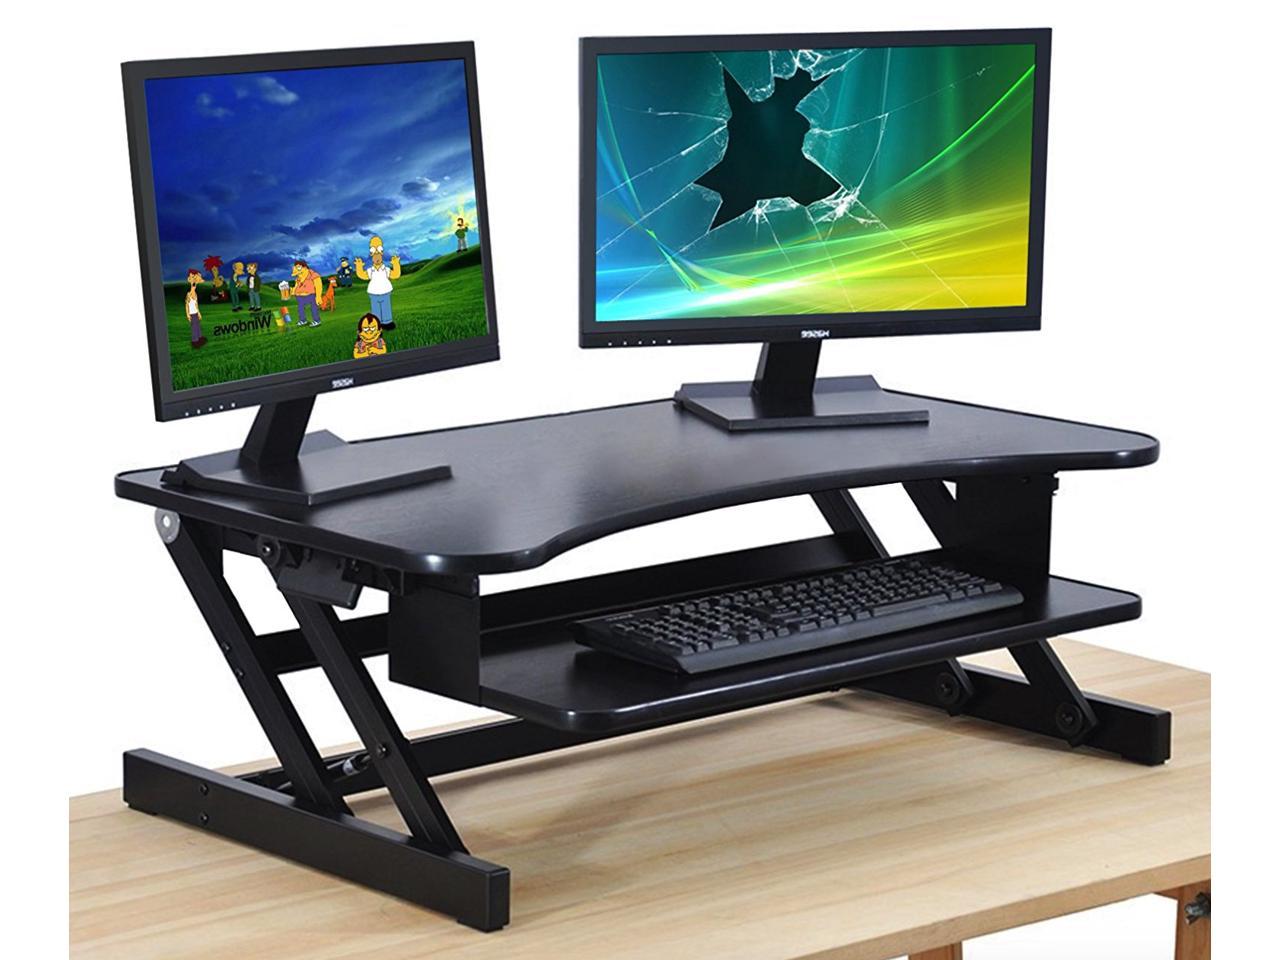 Adjustable Height Table Top Sit//Stand Desk riser fr double monitor//laptop-RB